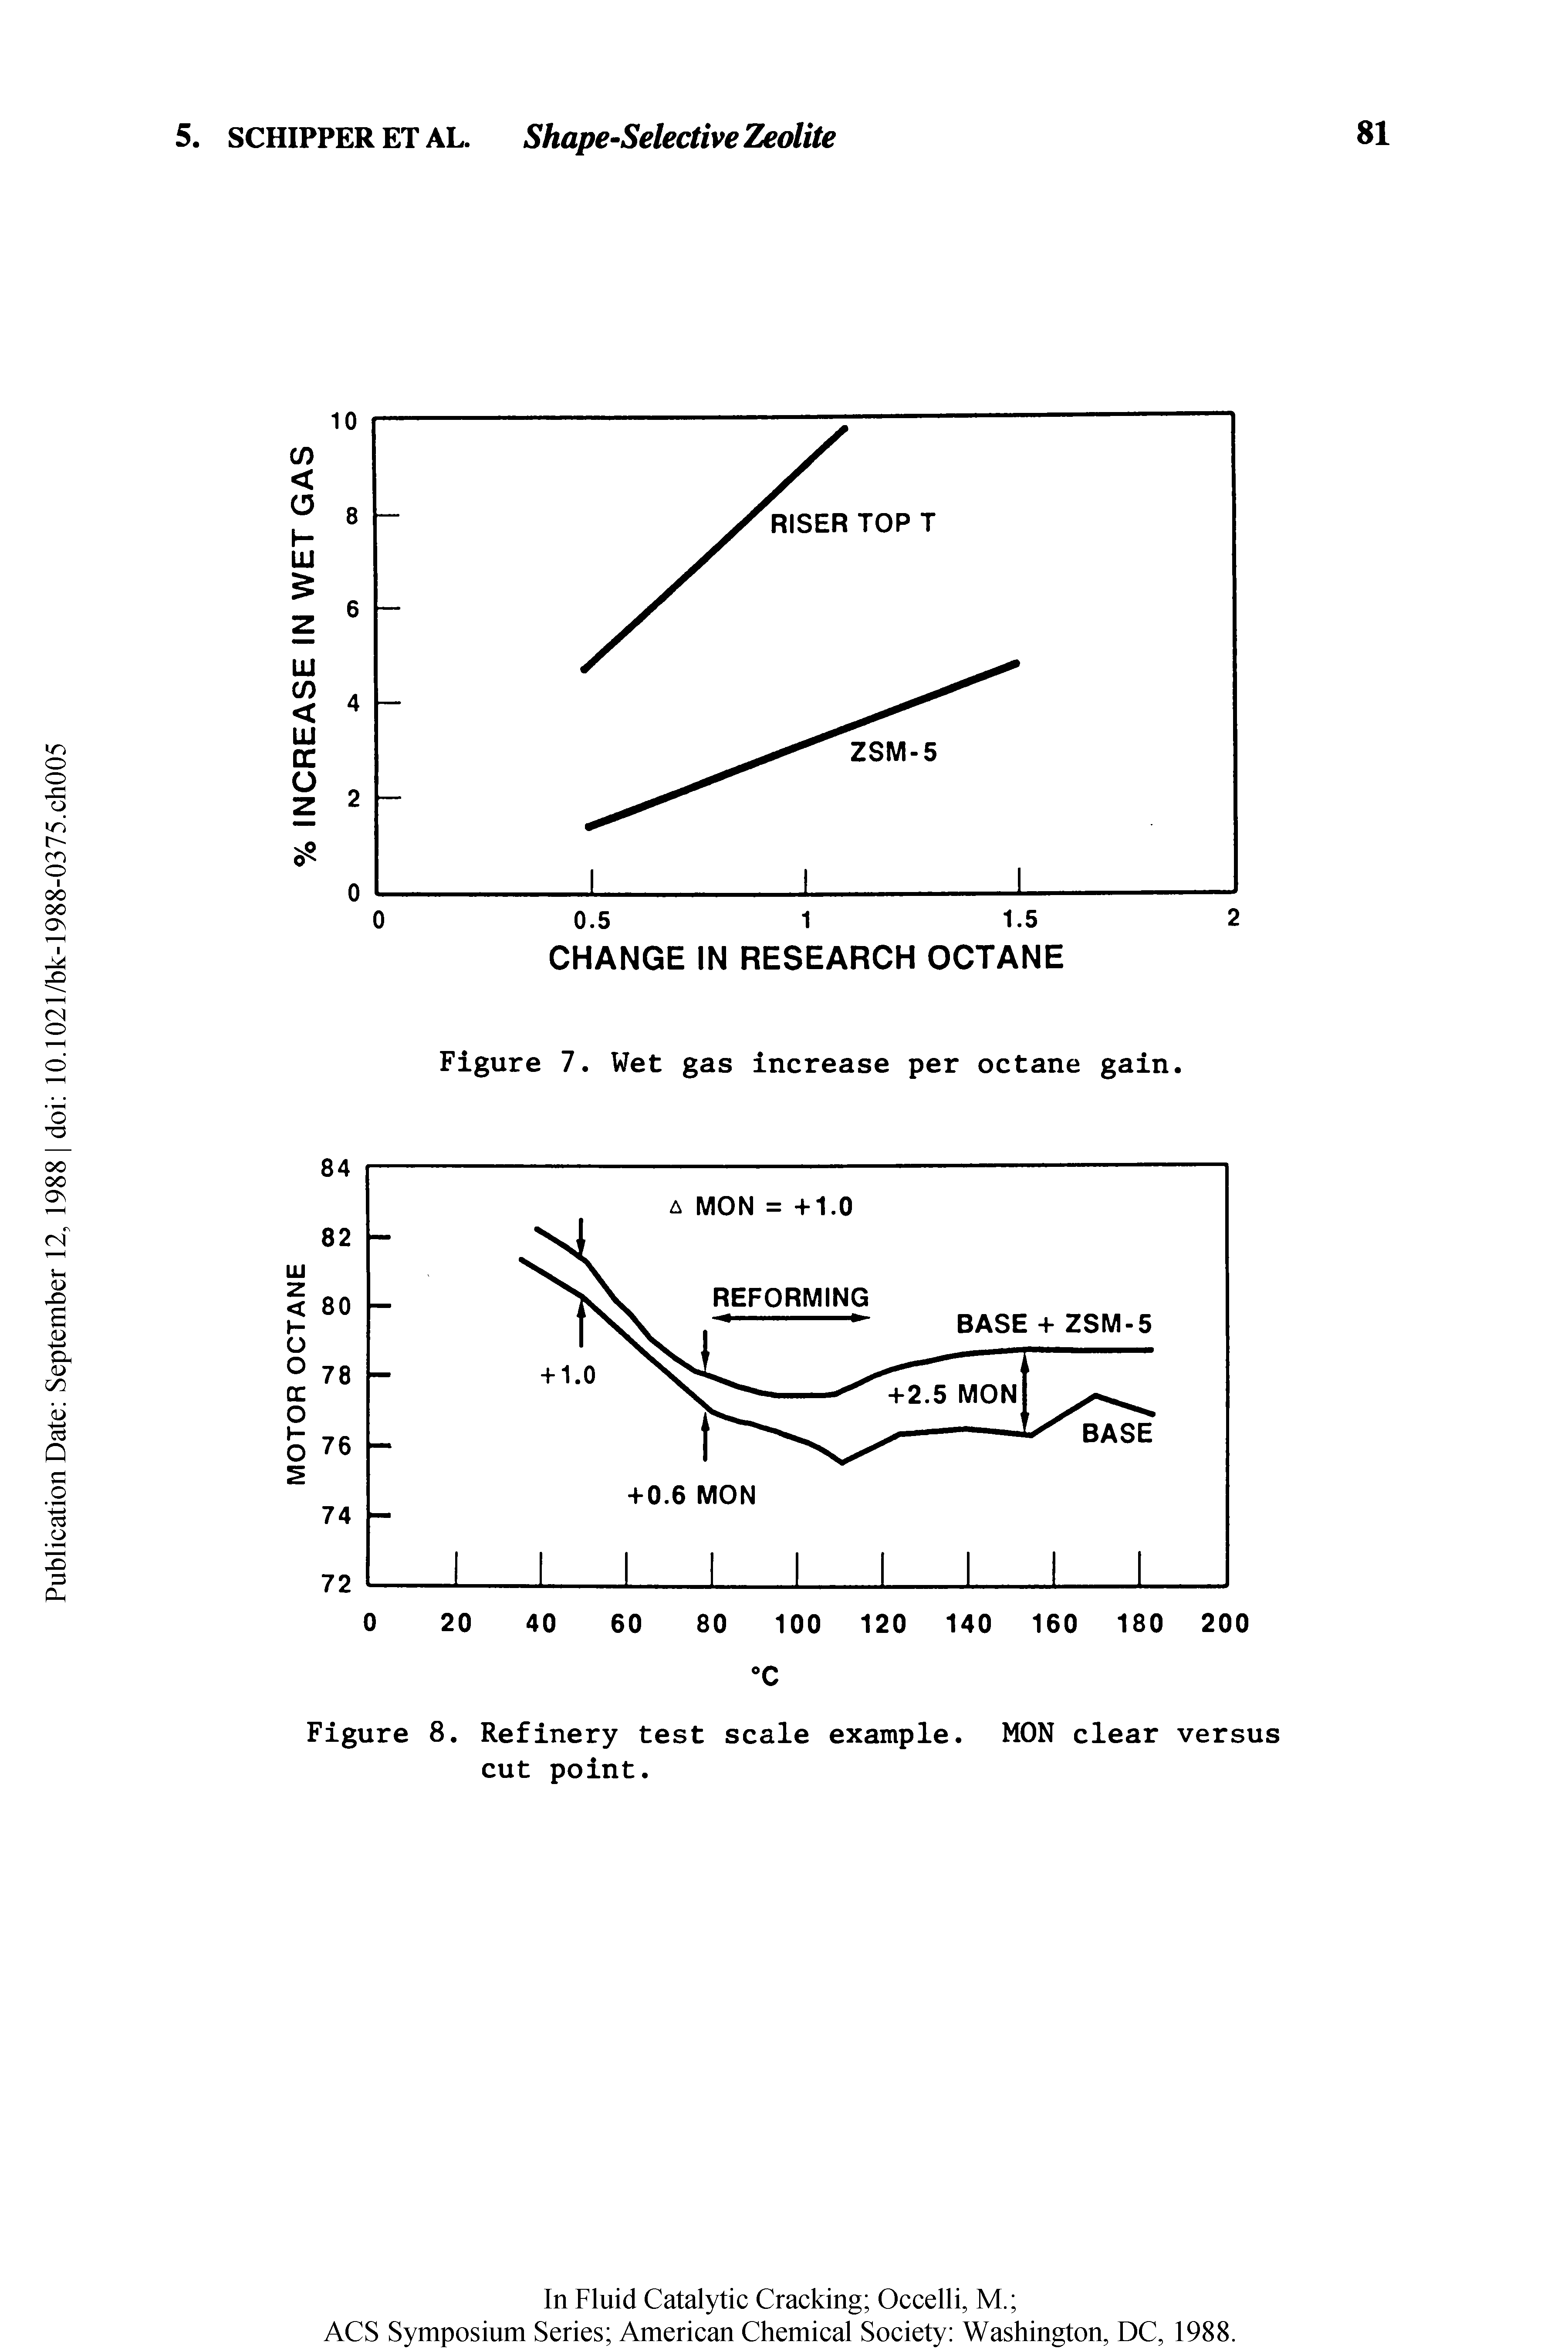 Figure 8. Refinery test scale example. MON clear versus cut point.